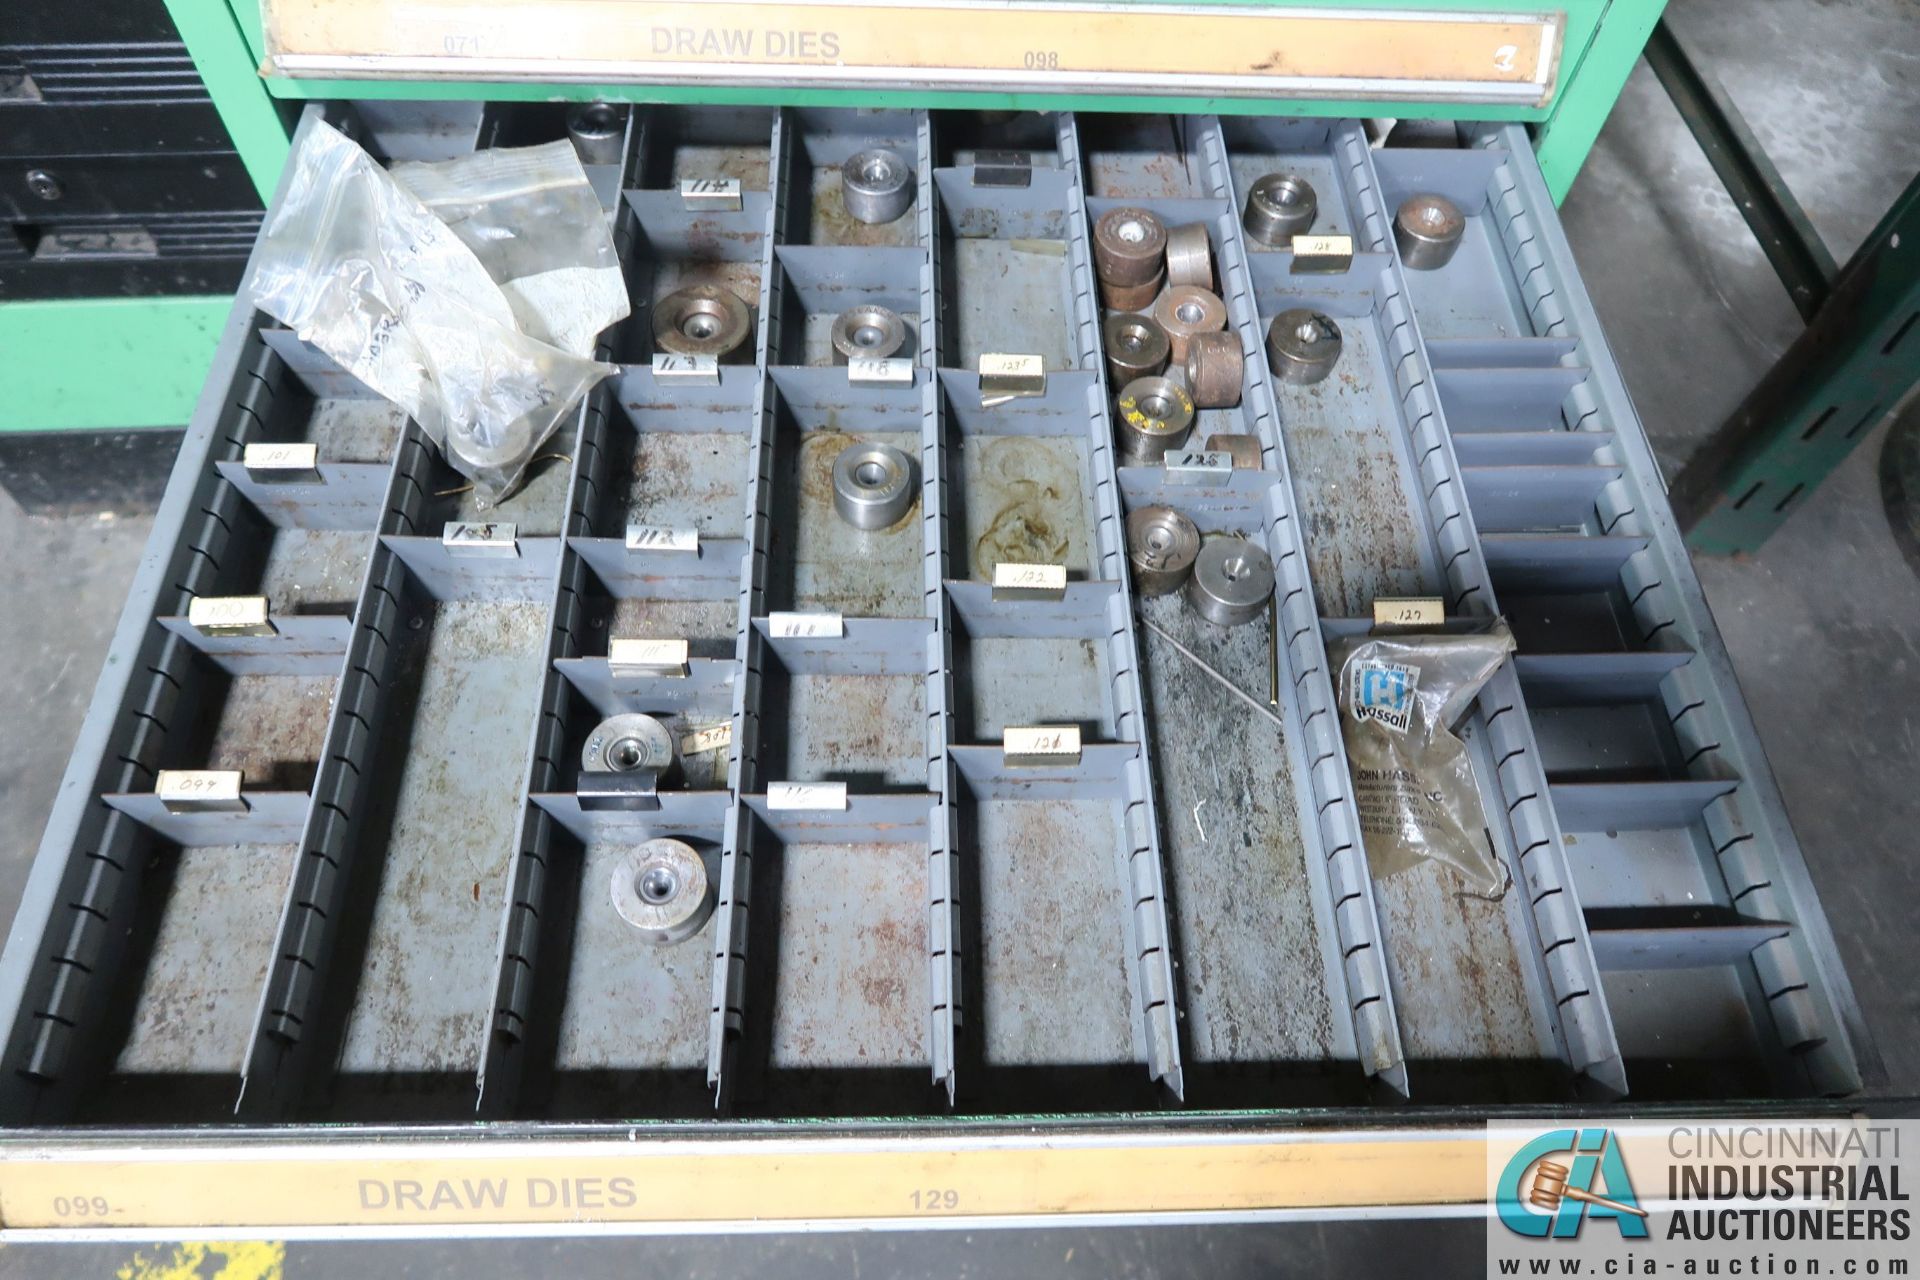 12-DRAWER CABINET WITH DRAW DIES - Image 8 of 12